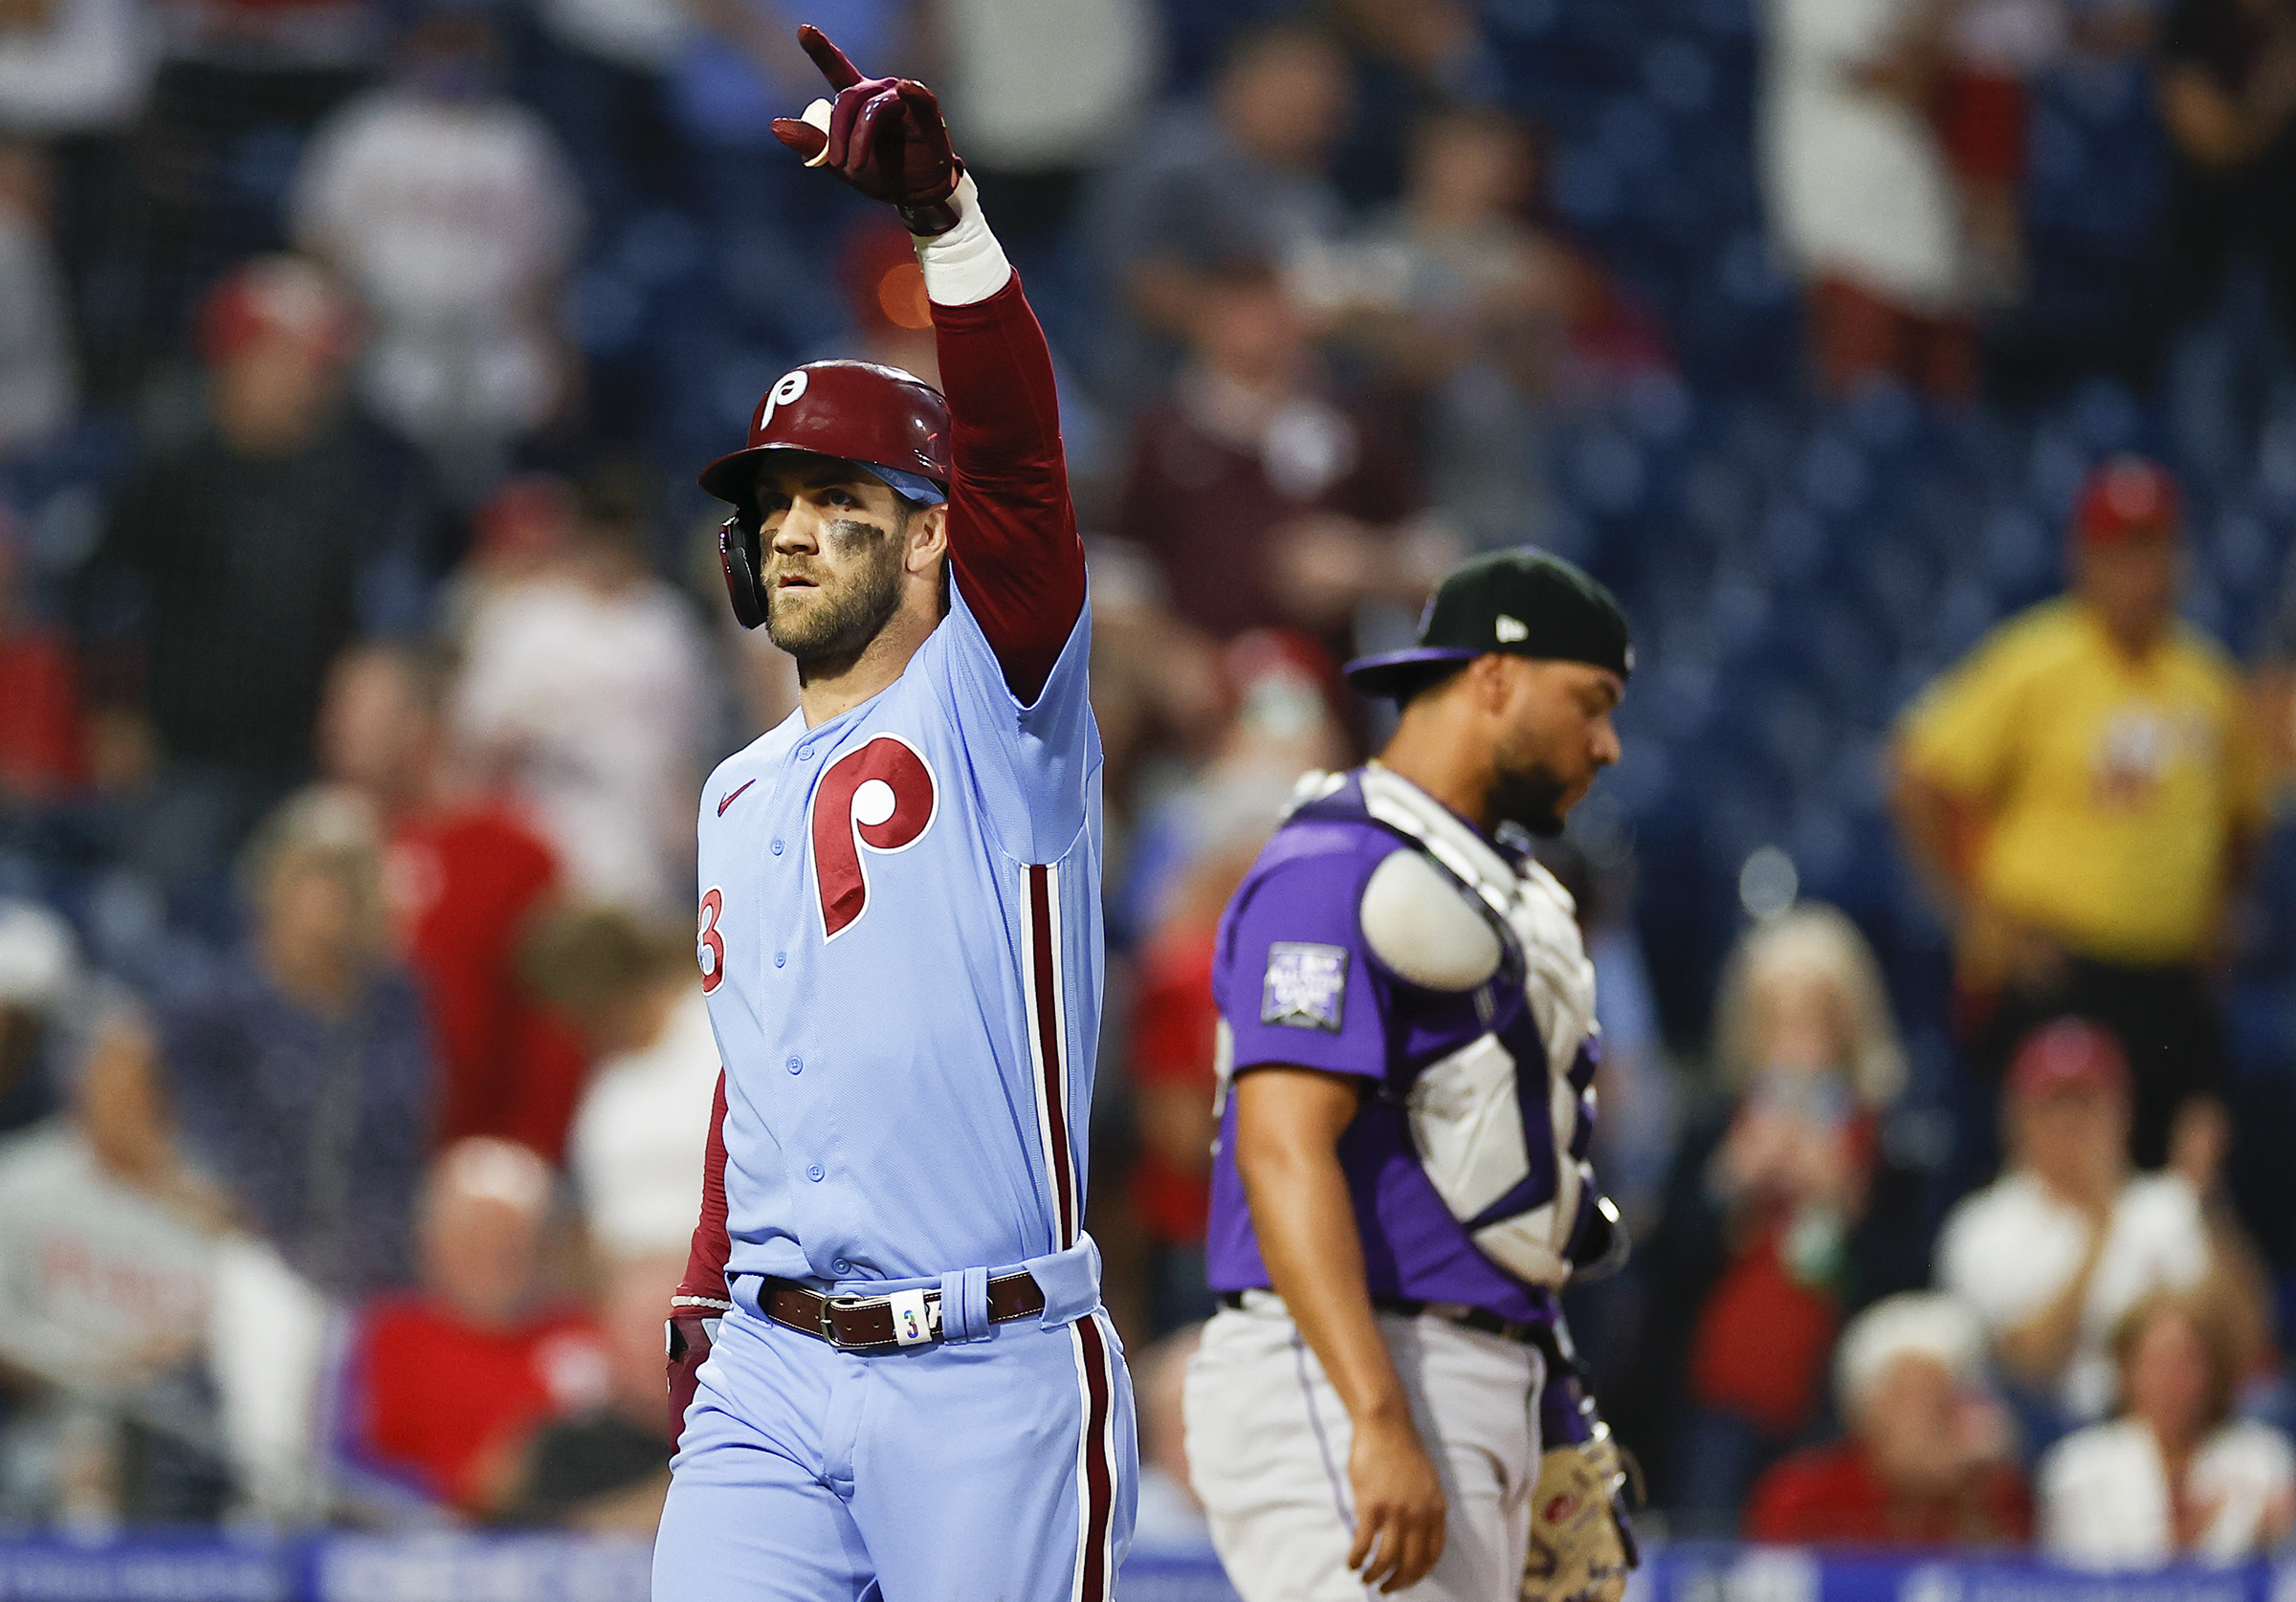 Bryce Harper's wearing a Mike Schmidt throwback #Phillies jersey